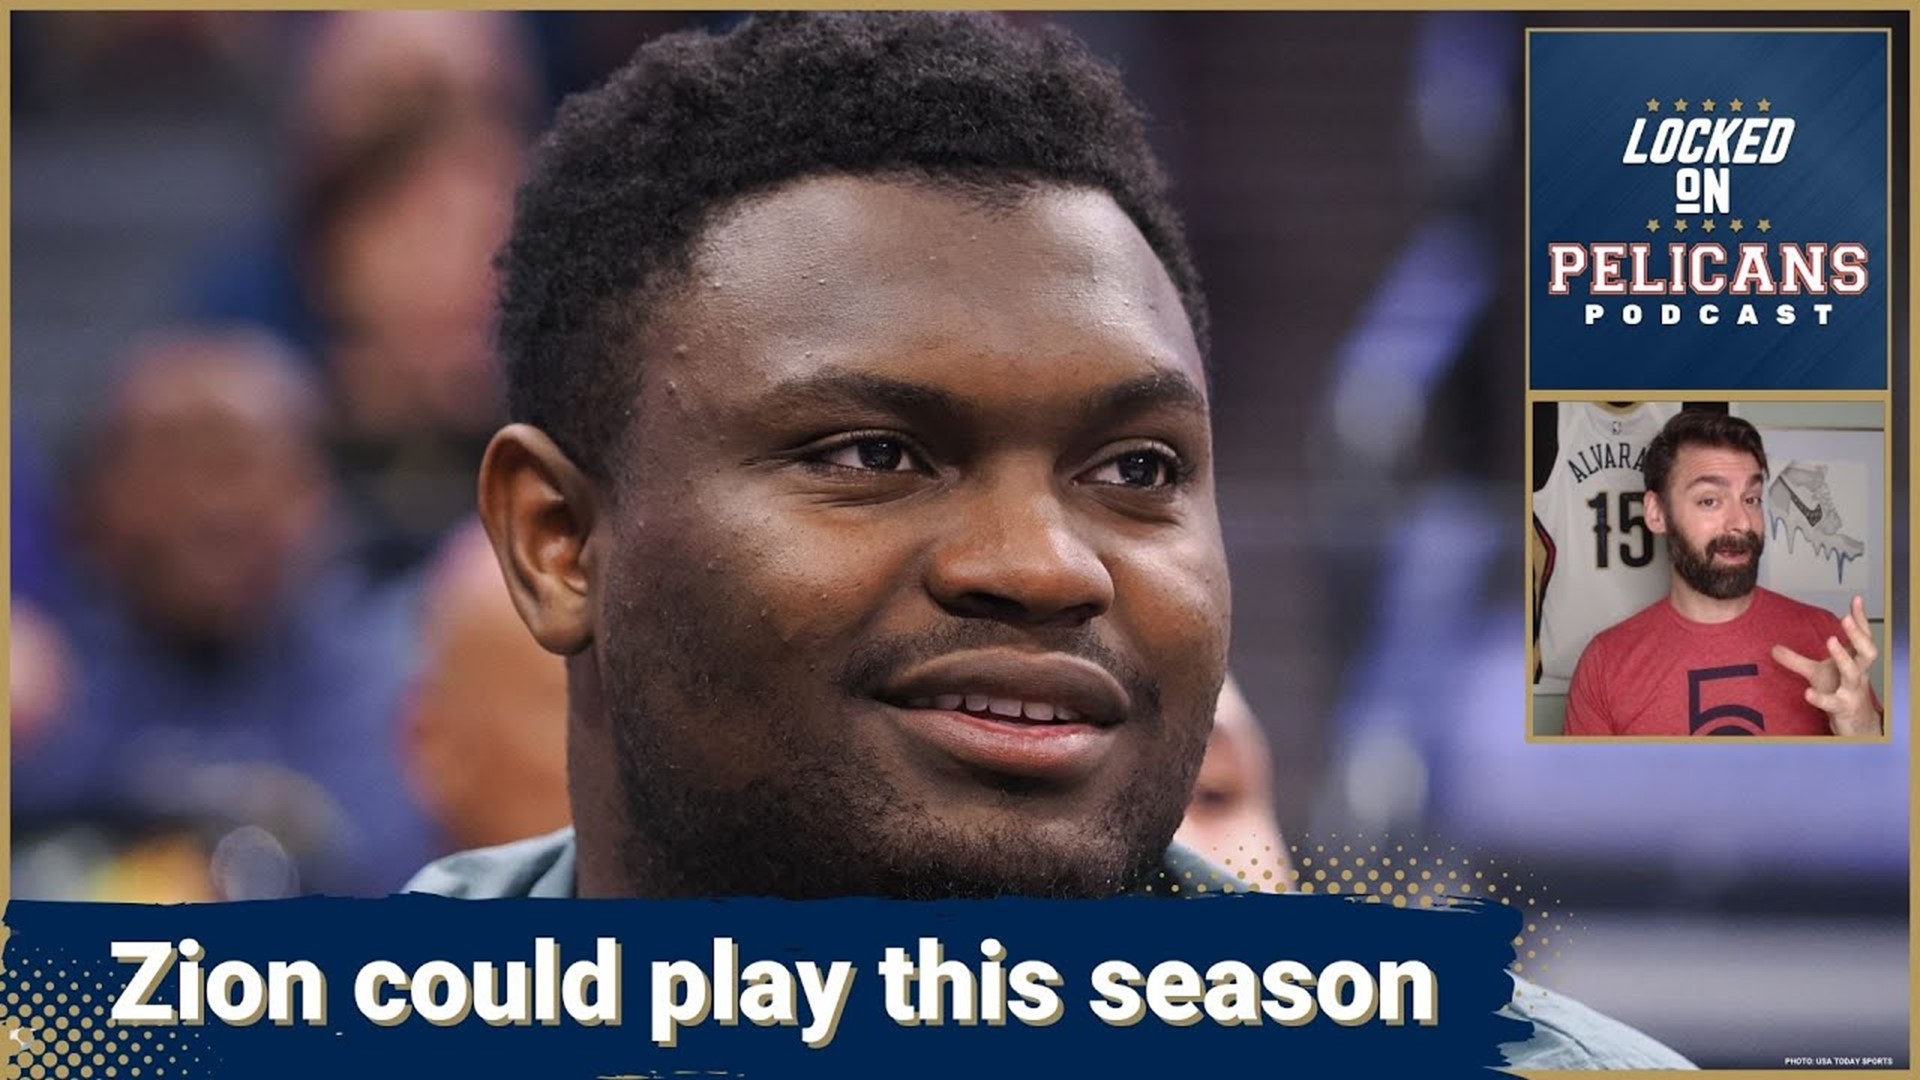 Yes there is a (small) chance Zion Williamson could play for the New Orleans Pelicans this season after the latest injury update.